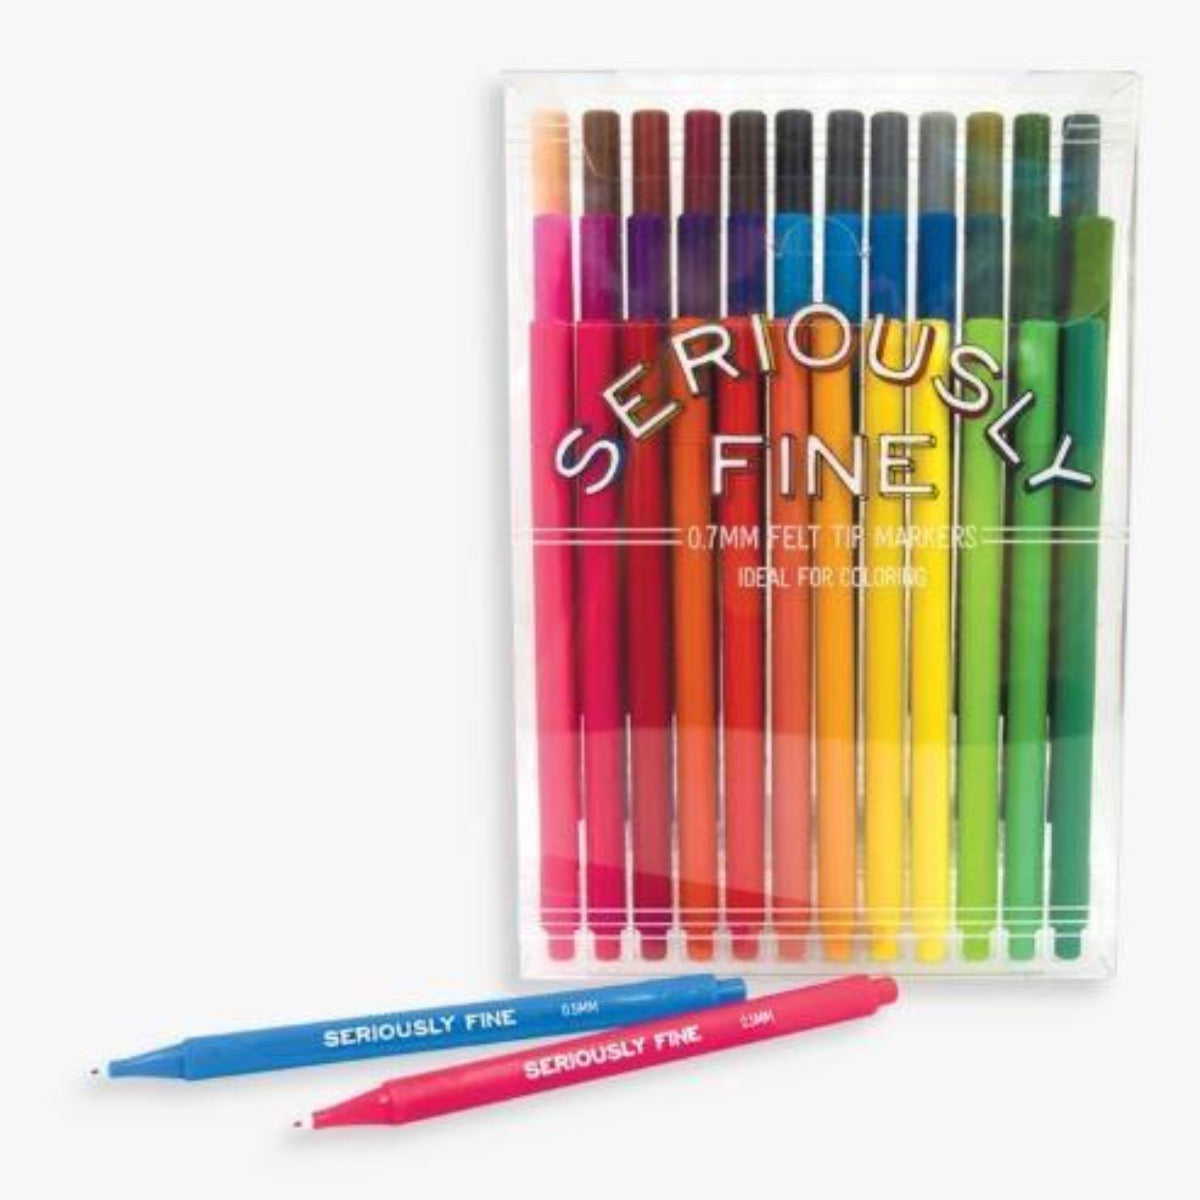 Seriously Fine felt tip markers